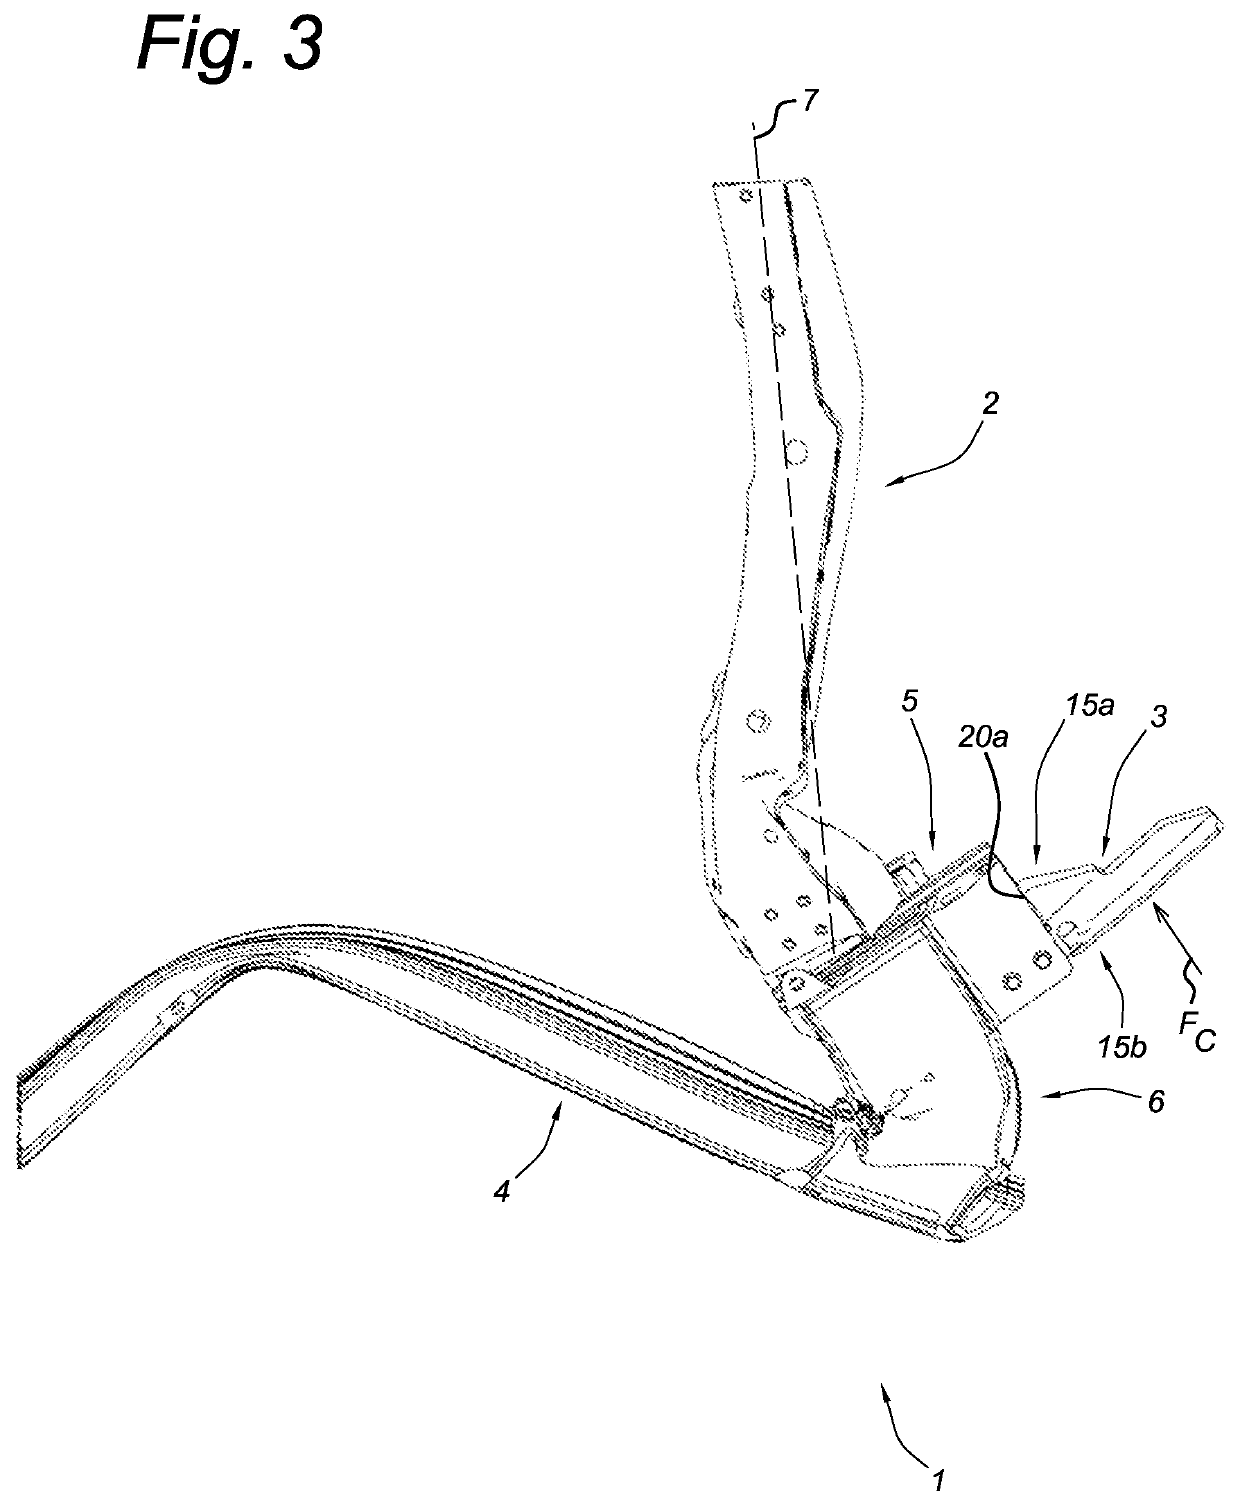 Vehicle front structure for improved compatibility during a frontal crash